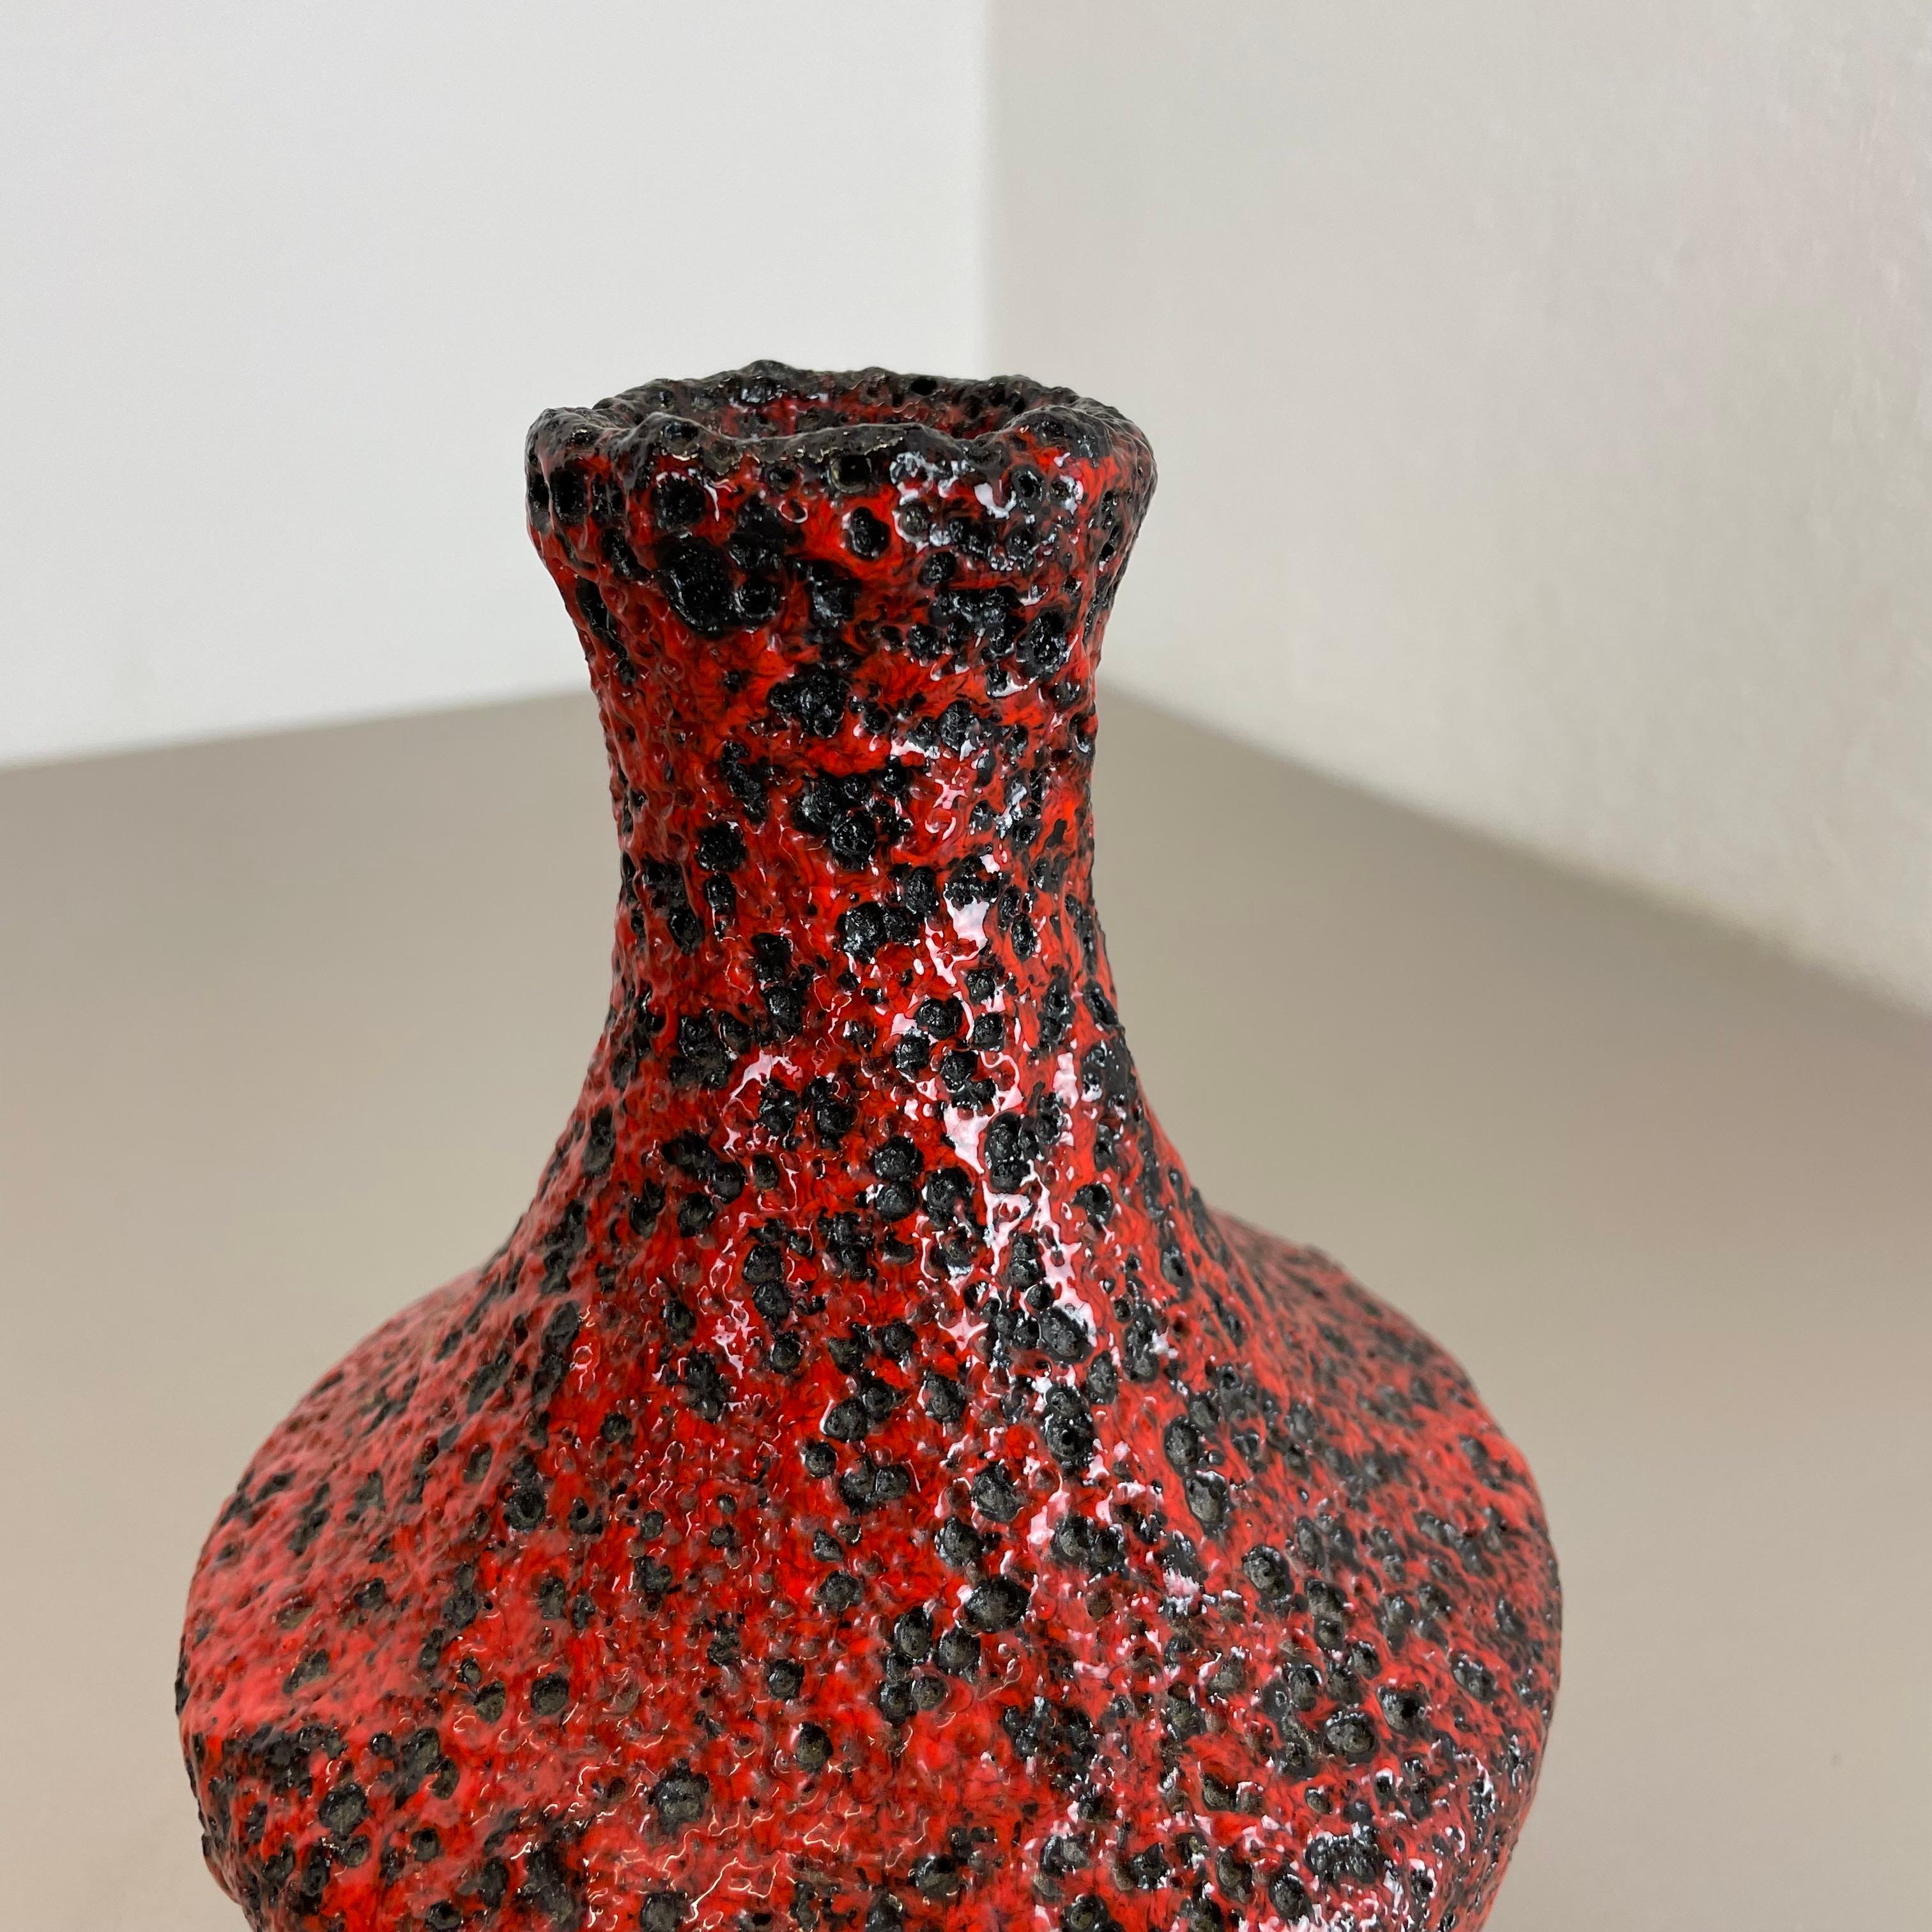 Brutalist Colorful Pottery red-black Vase Made by Silberdistel, W. Germany, 1970 For Sale 4